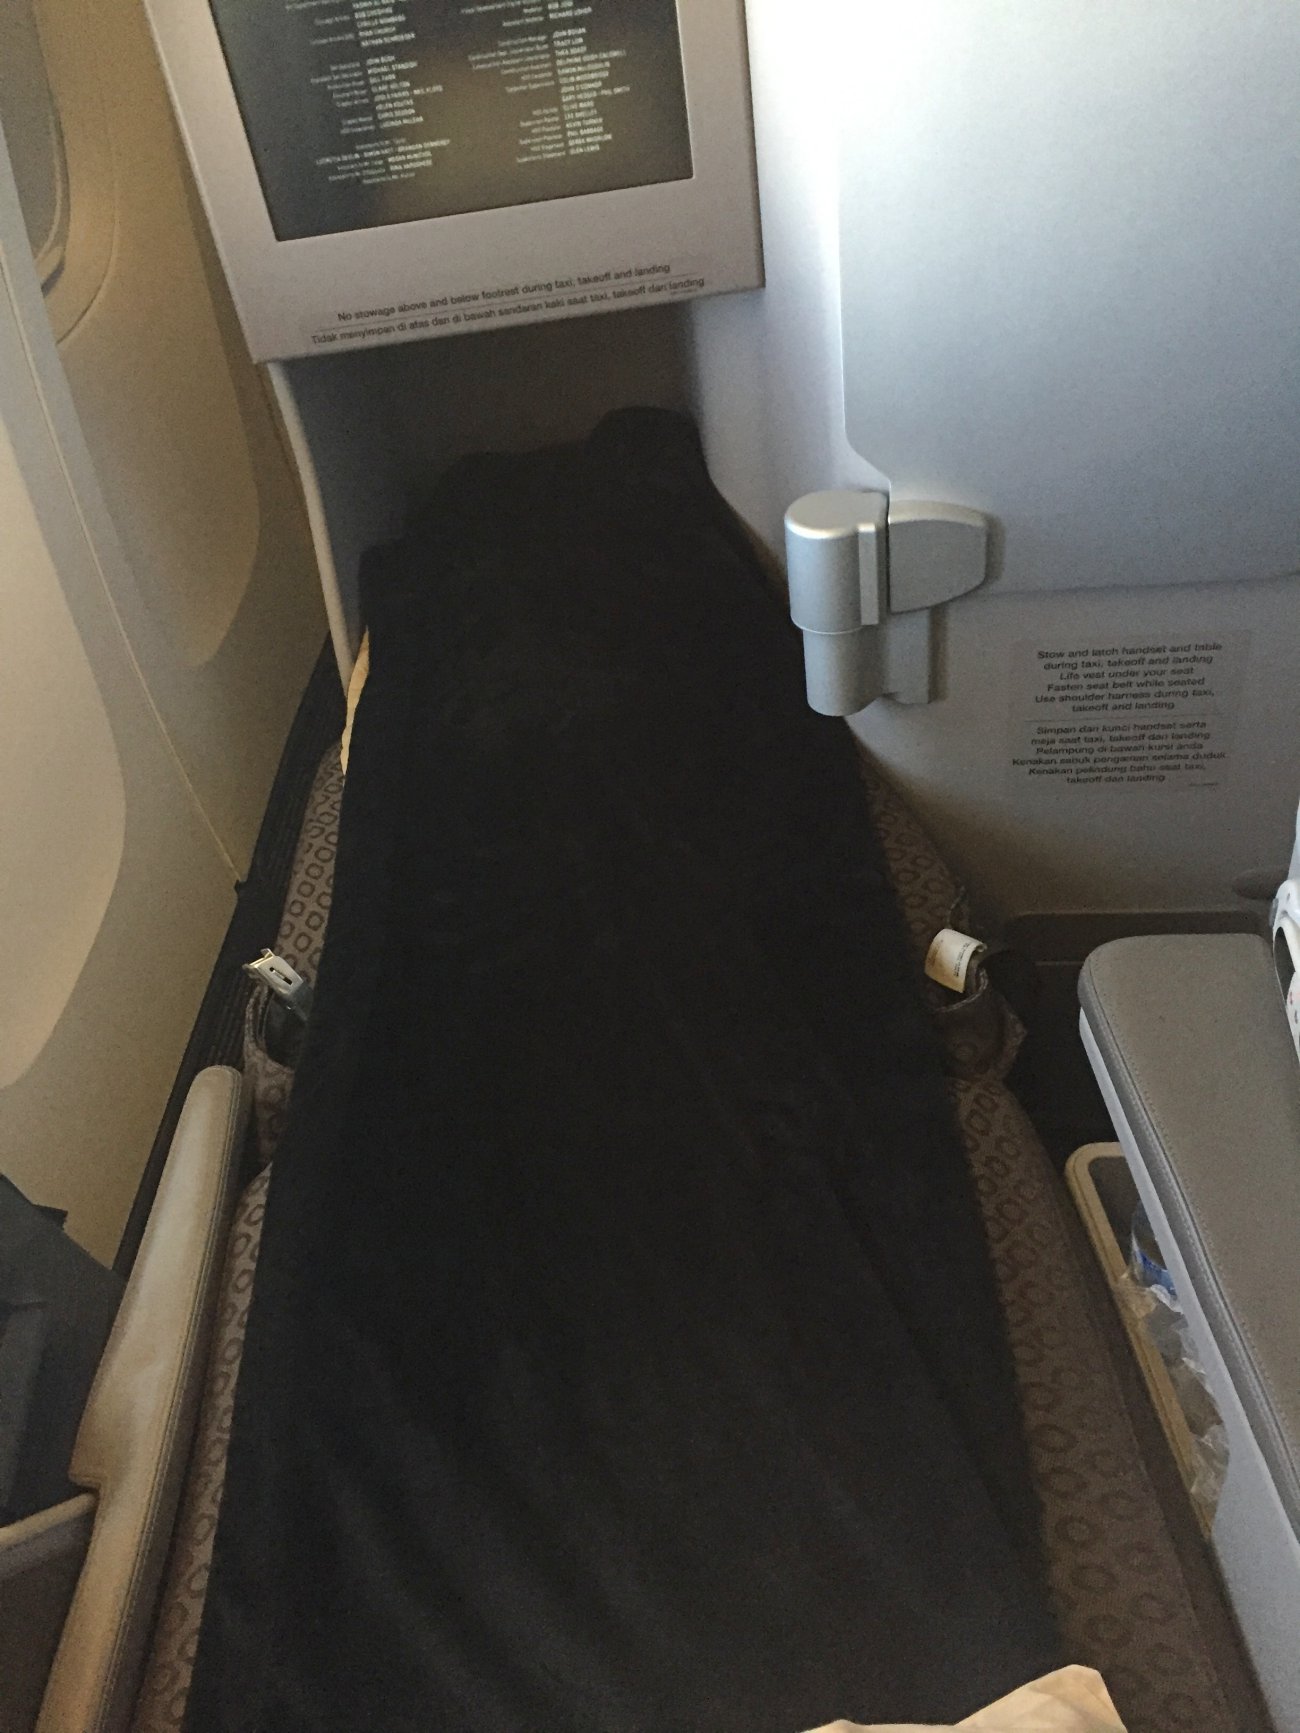 Review-Garuda Business Class Bed and IFE Screen